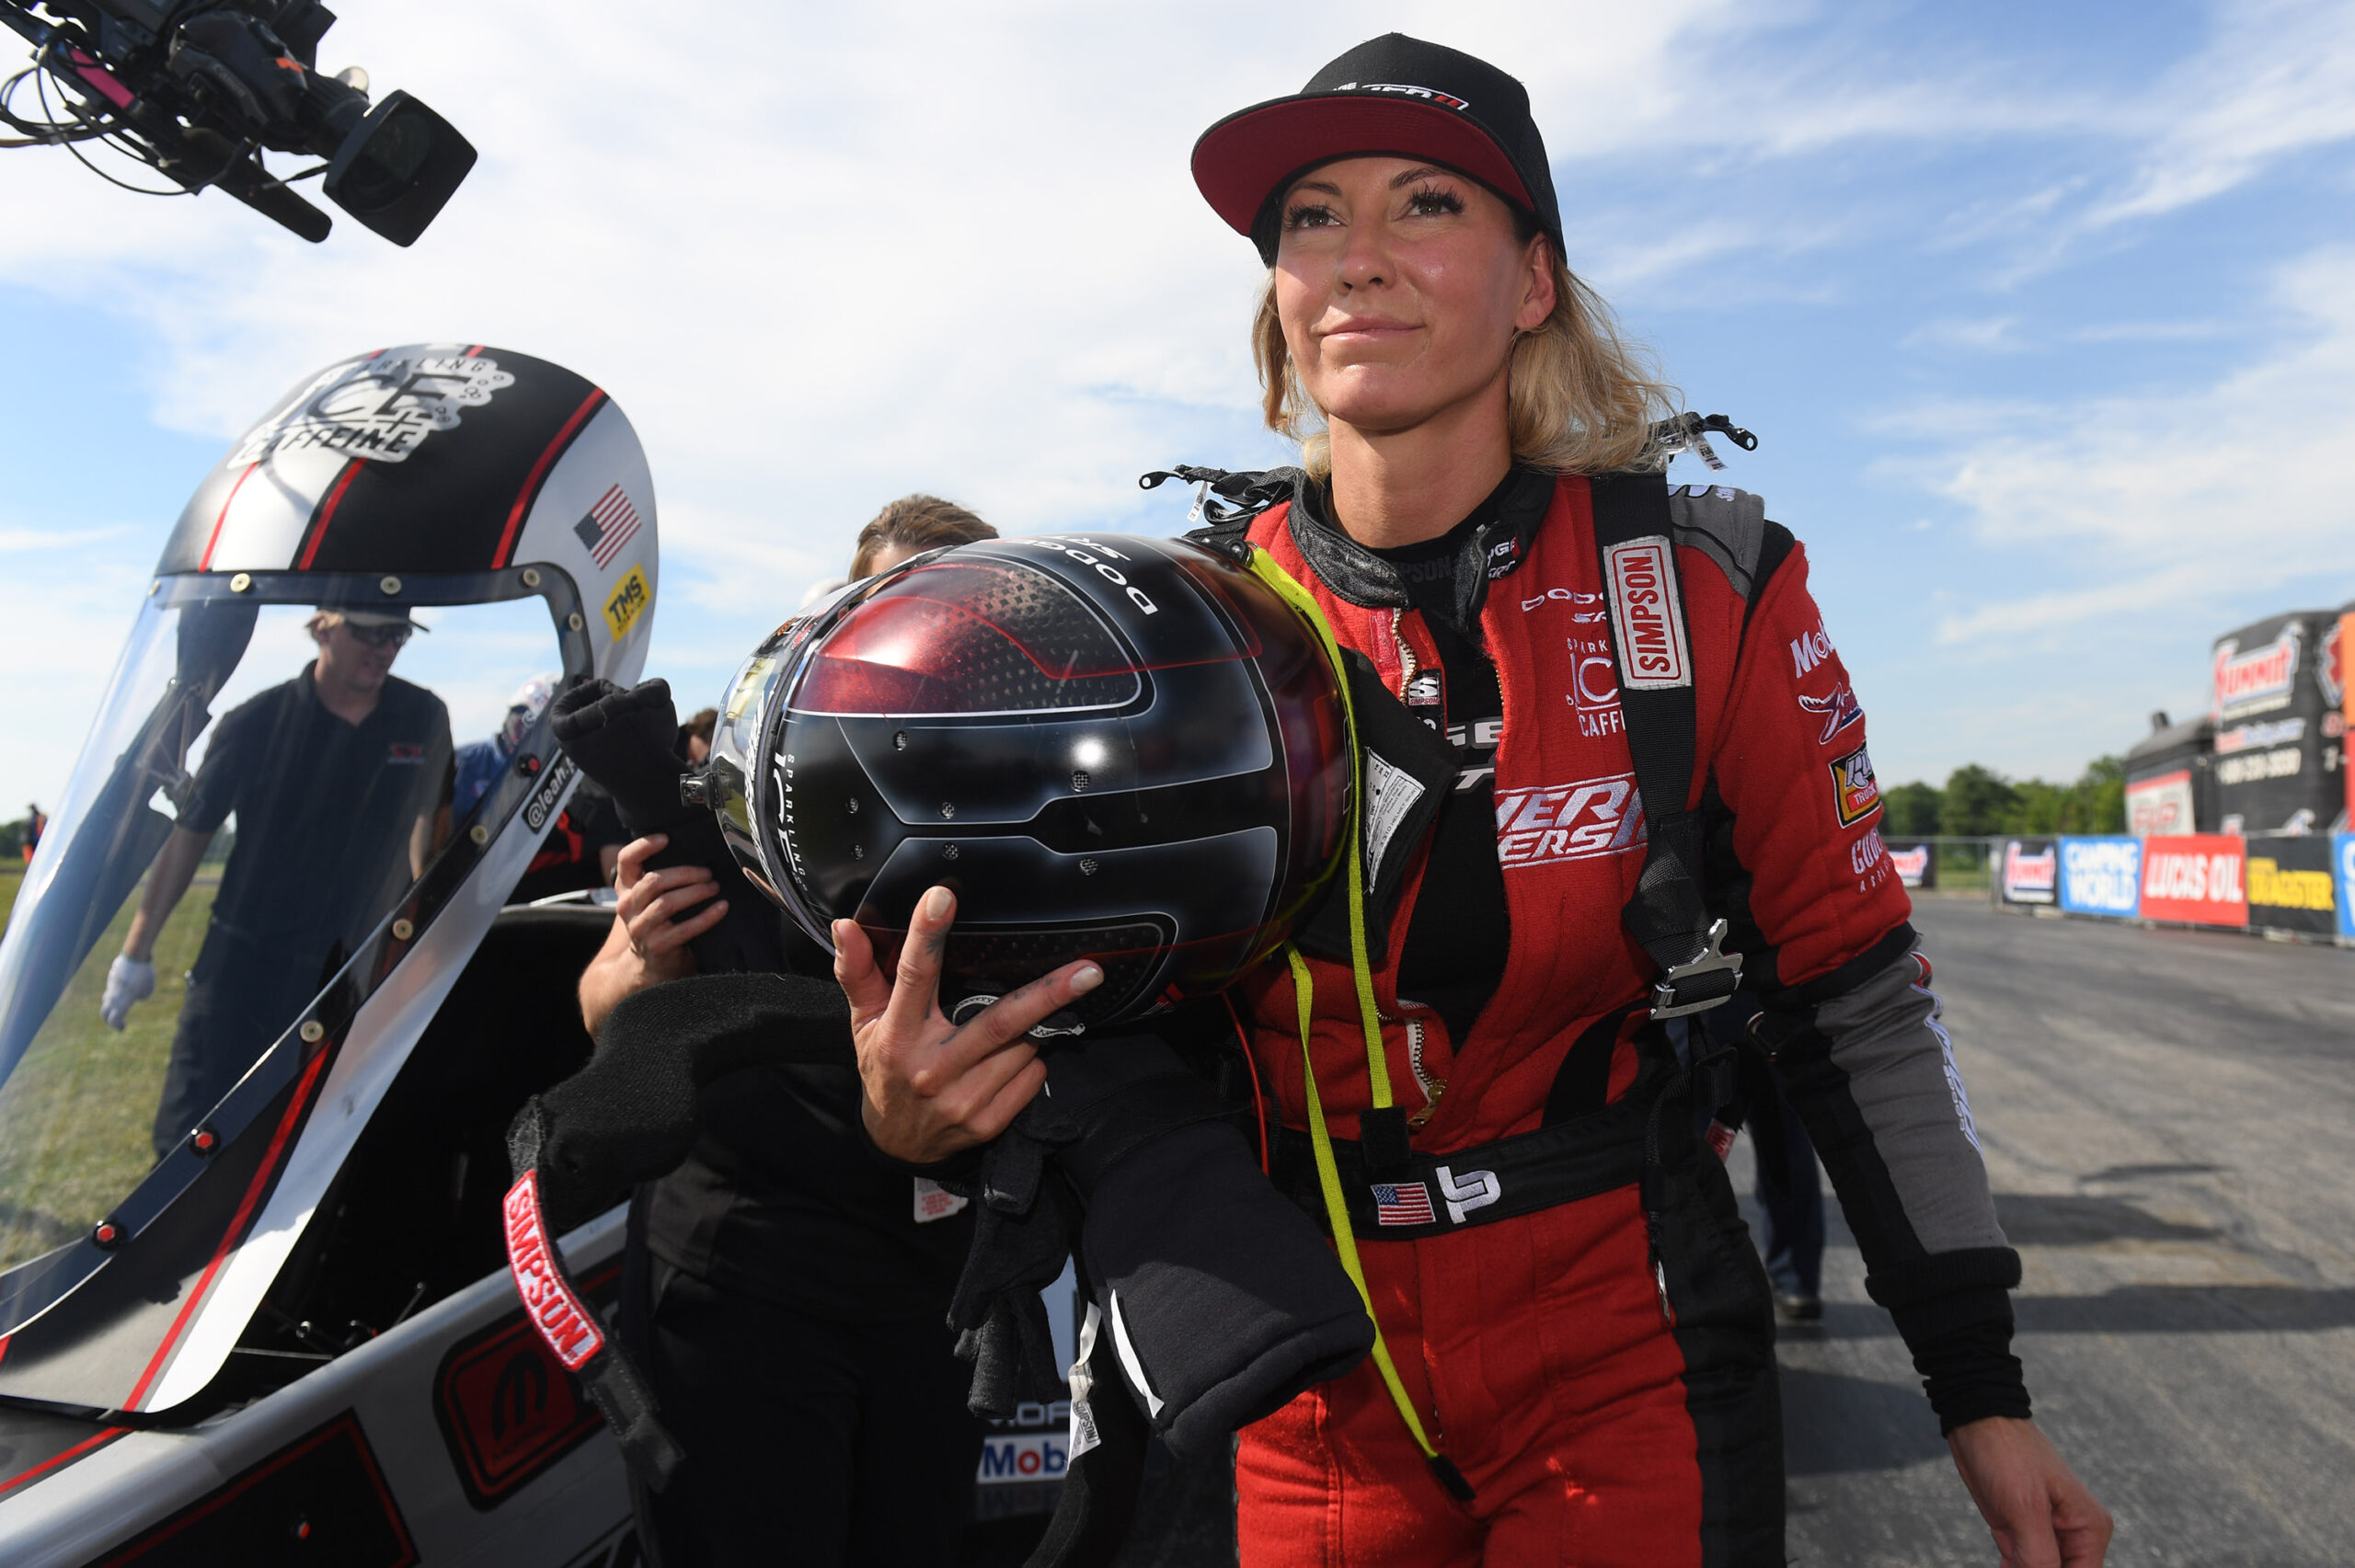 Top Fuel Semifinal Appearance for Leah Pruett and Dodge Power Brokers Dragster at NHRA Summit Racing Equipment Nationals